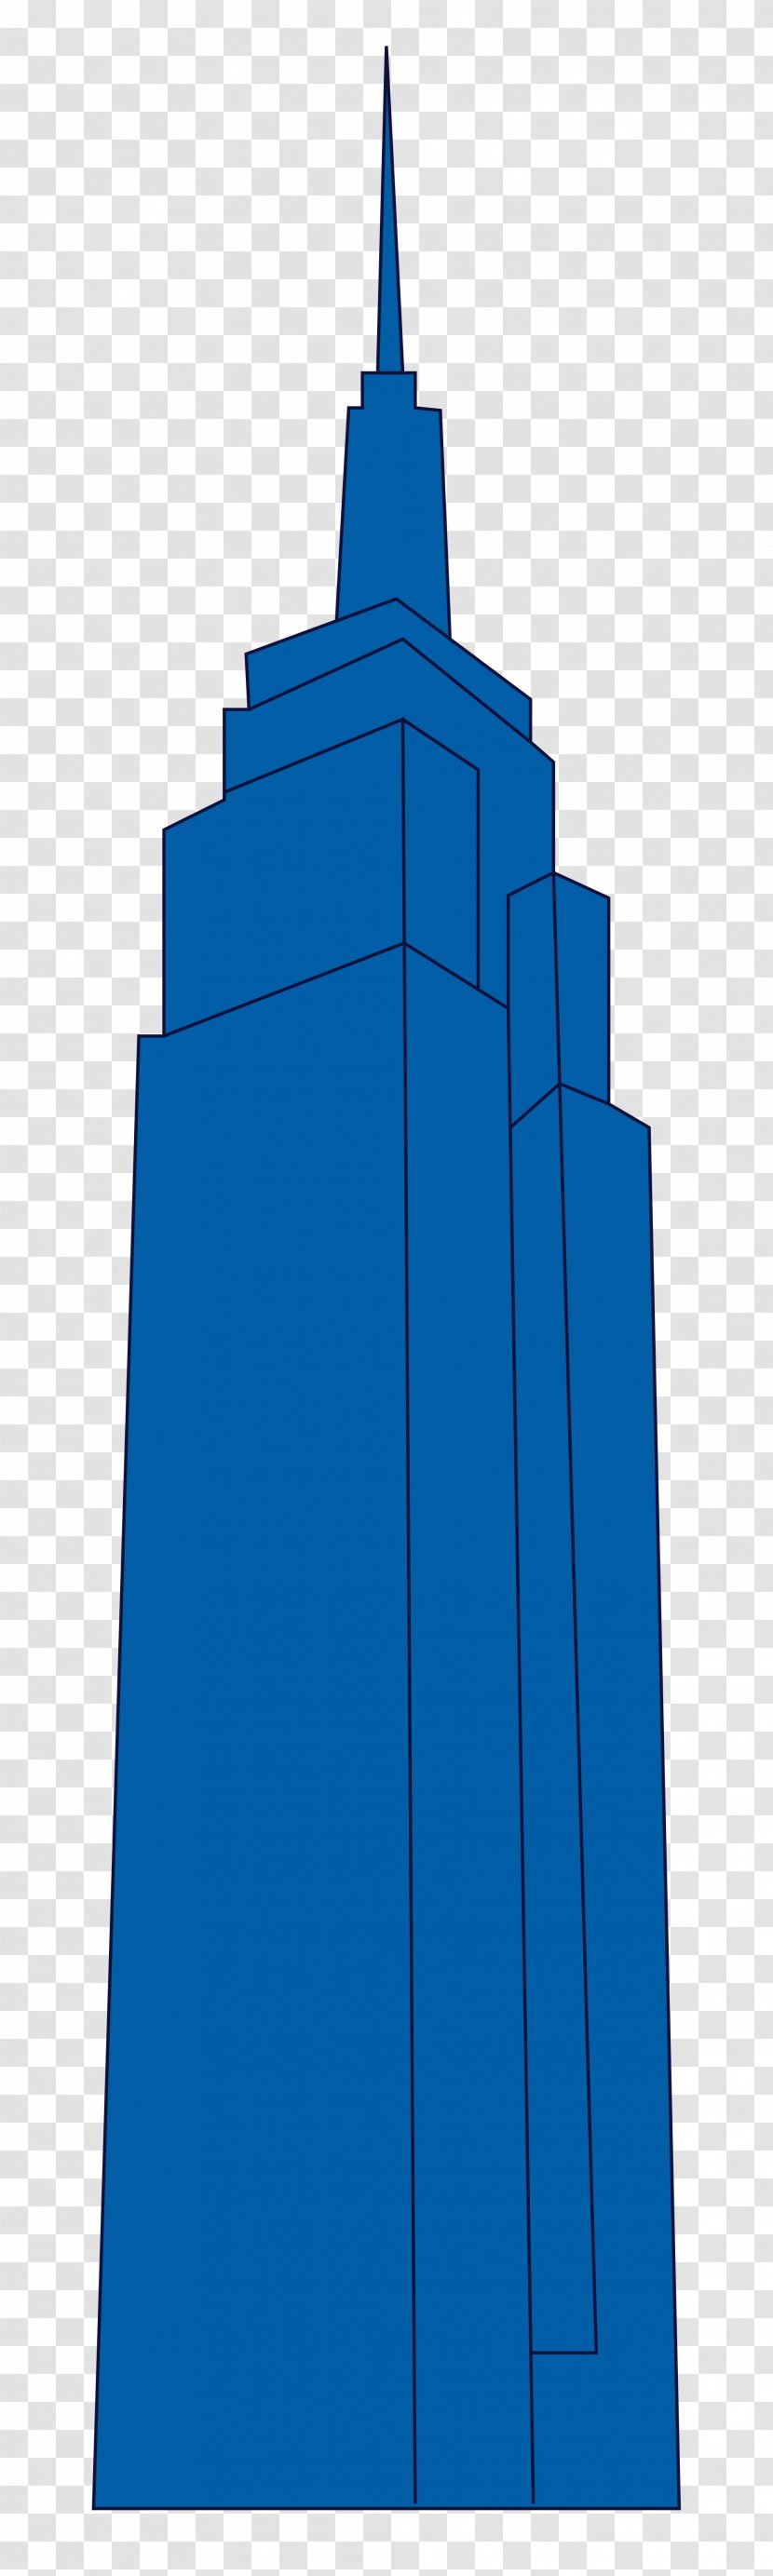 Empire State Building Transparent PNG